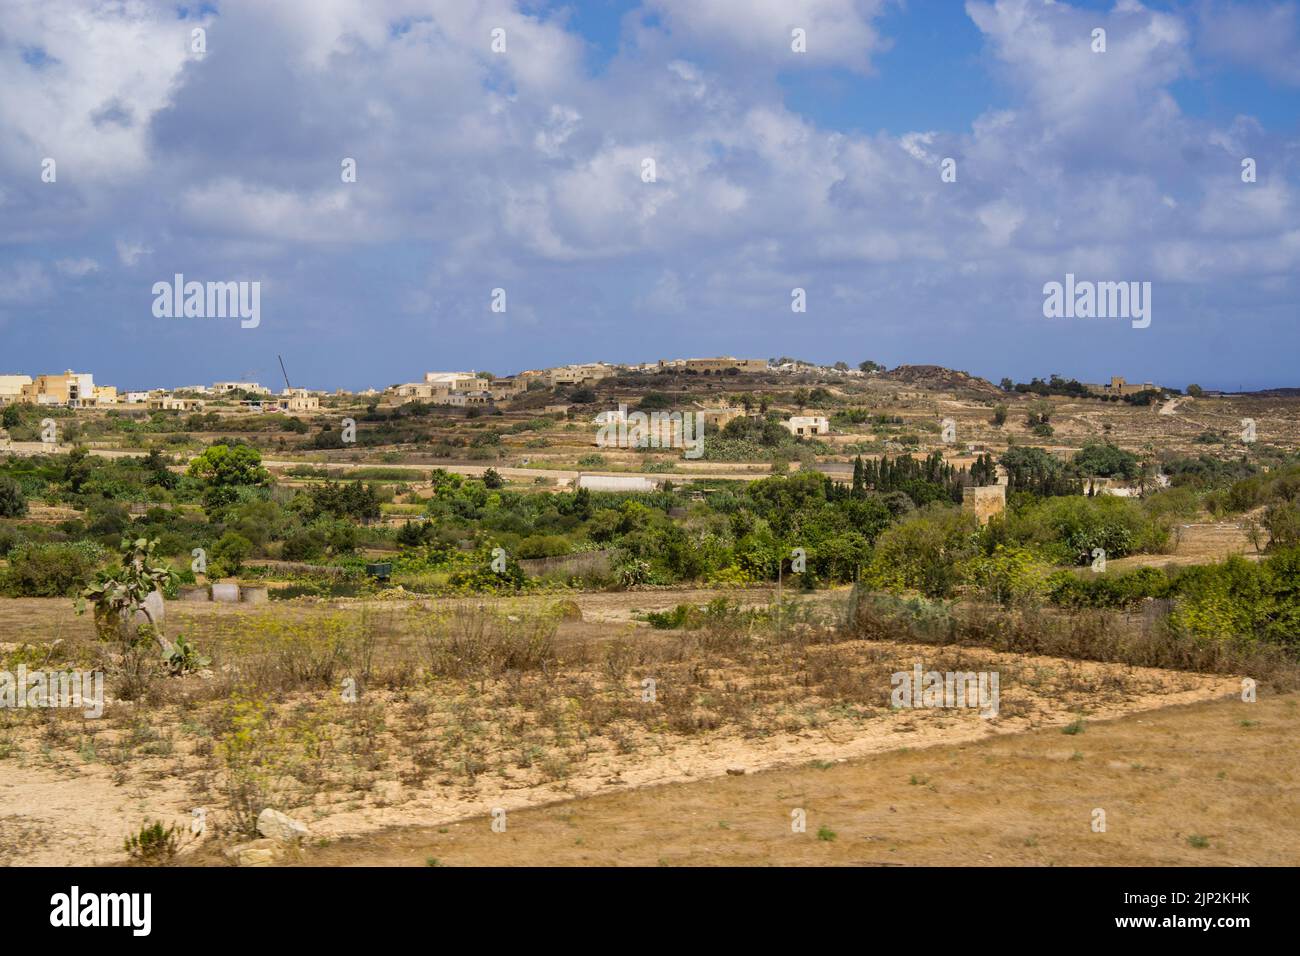 A beautiful view of agricultural crops in Gozo, Malta Stock Photo